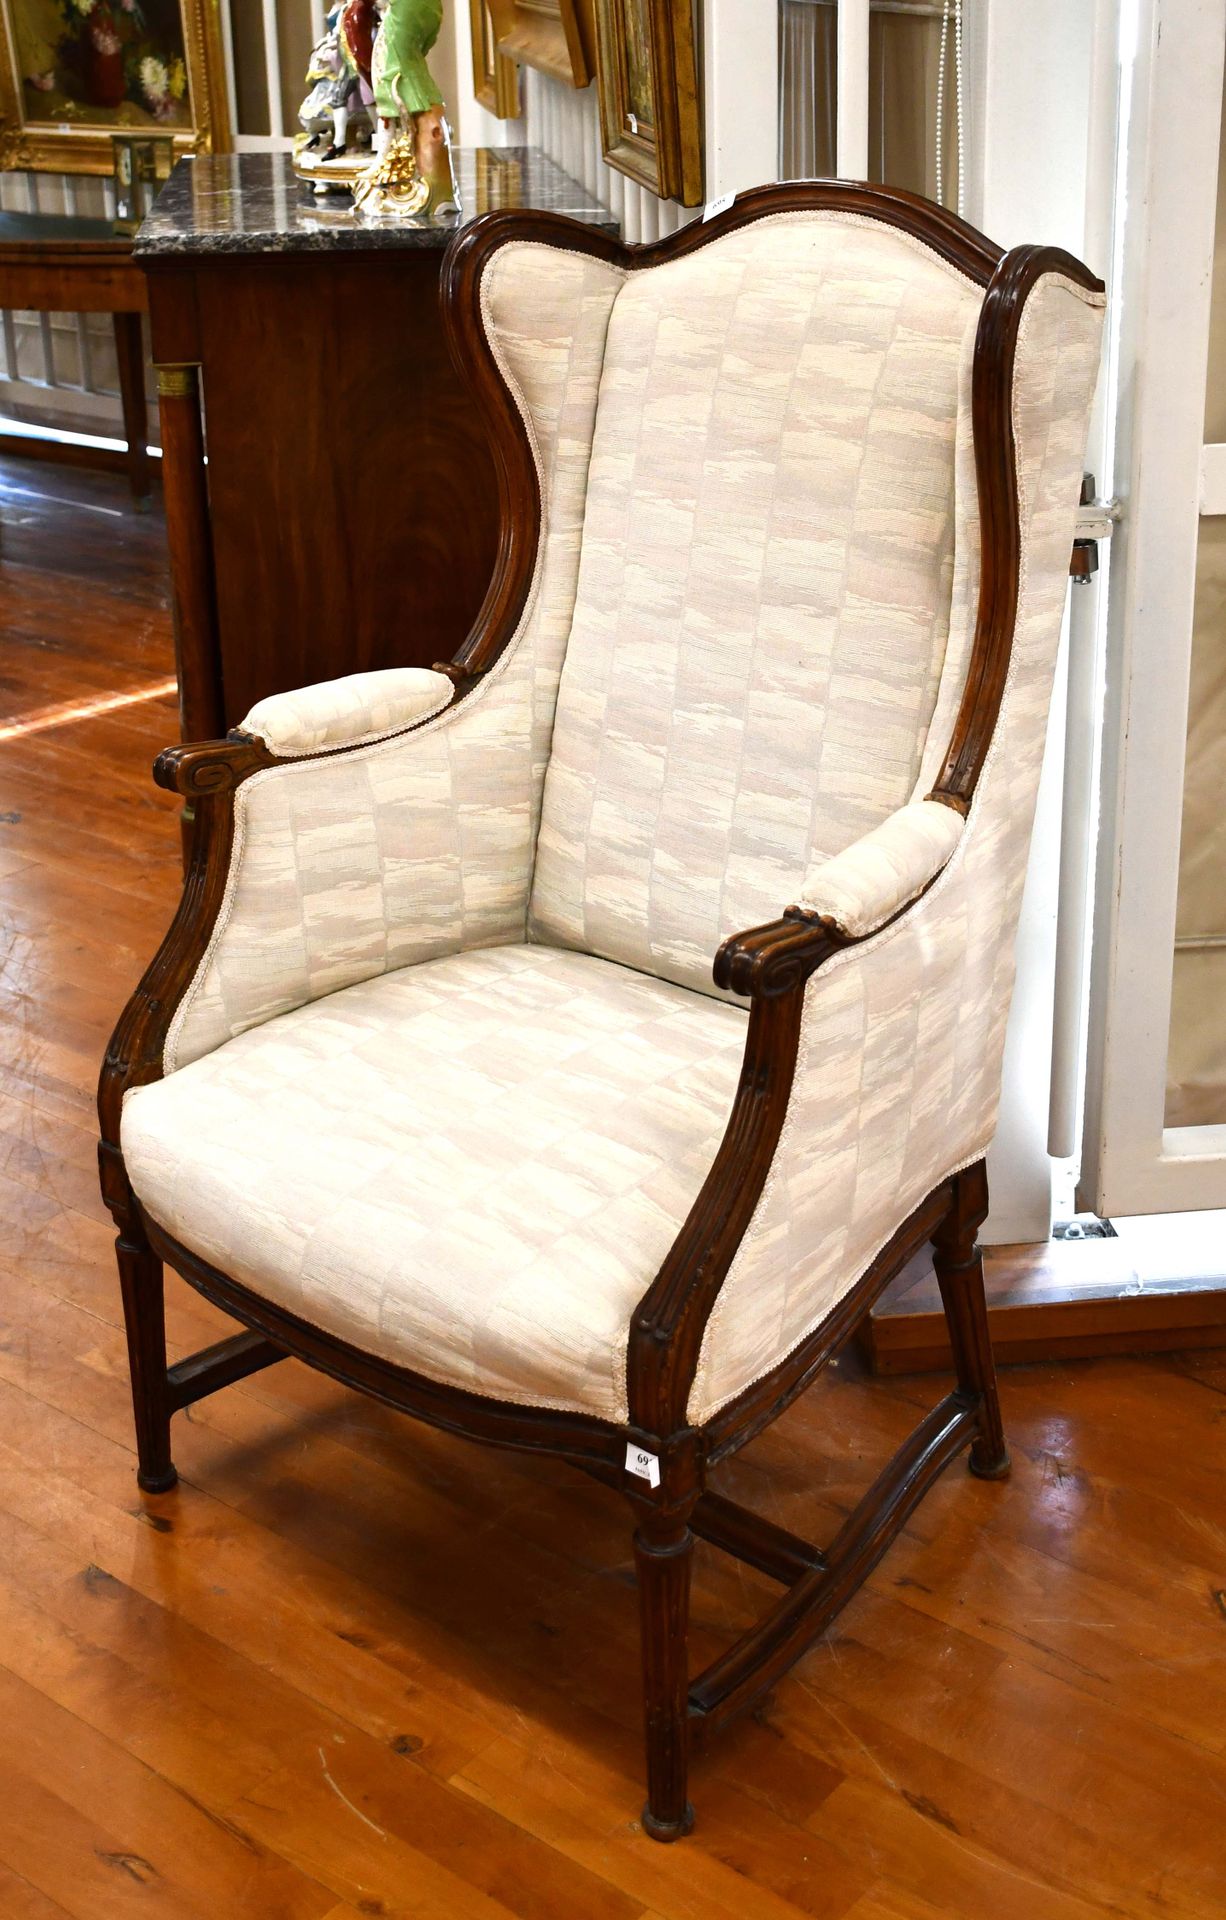 Null Louis XVI style wing chair with fluted legs connected by a brace